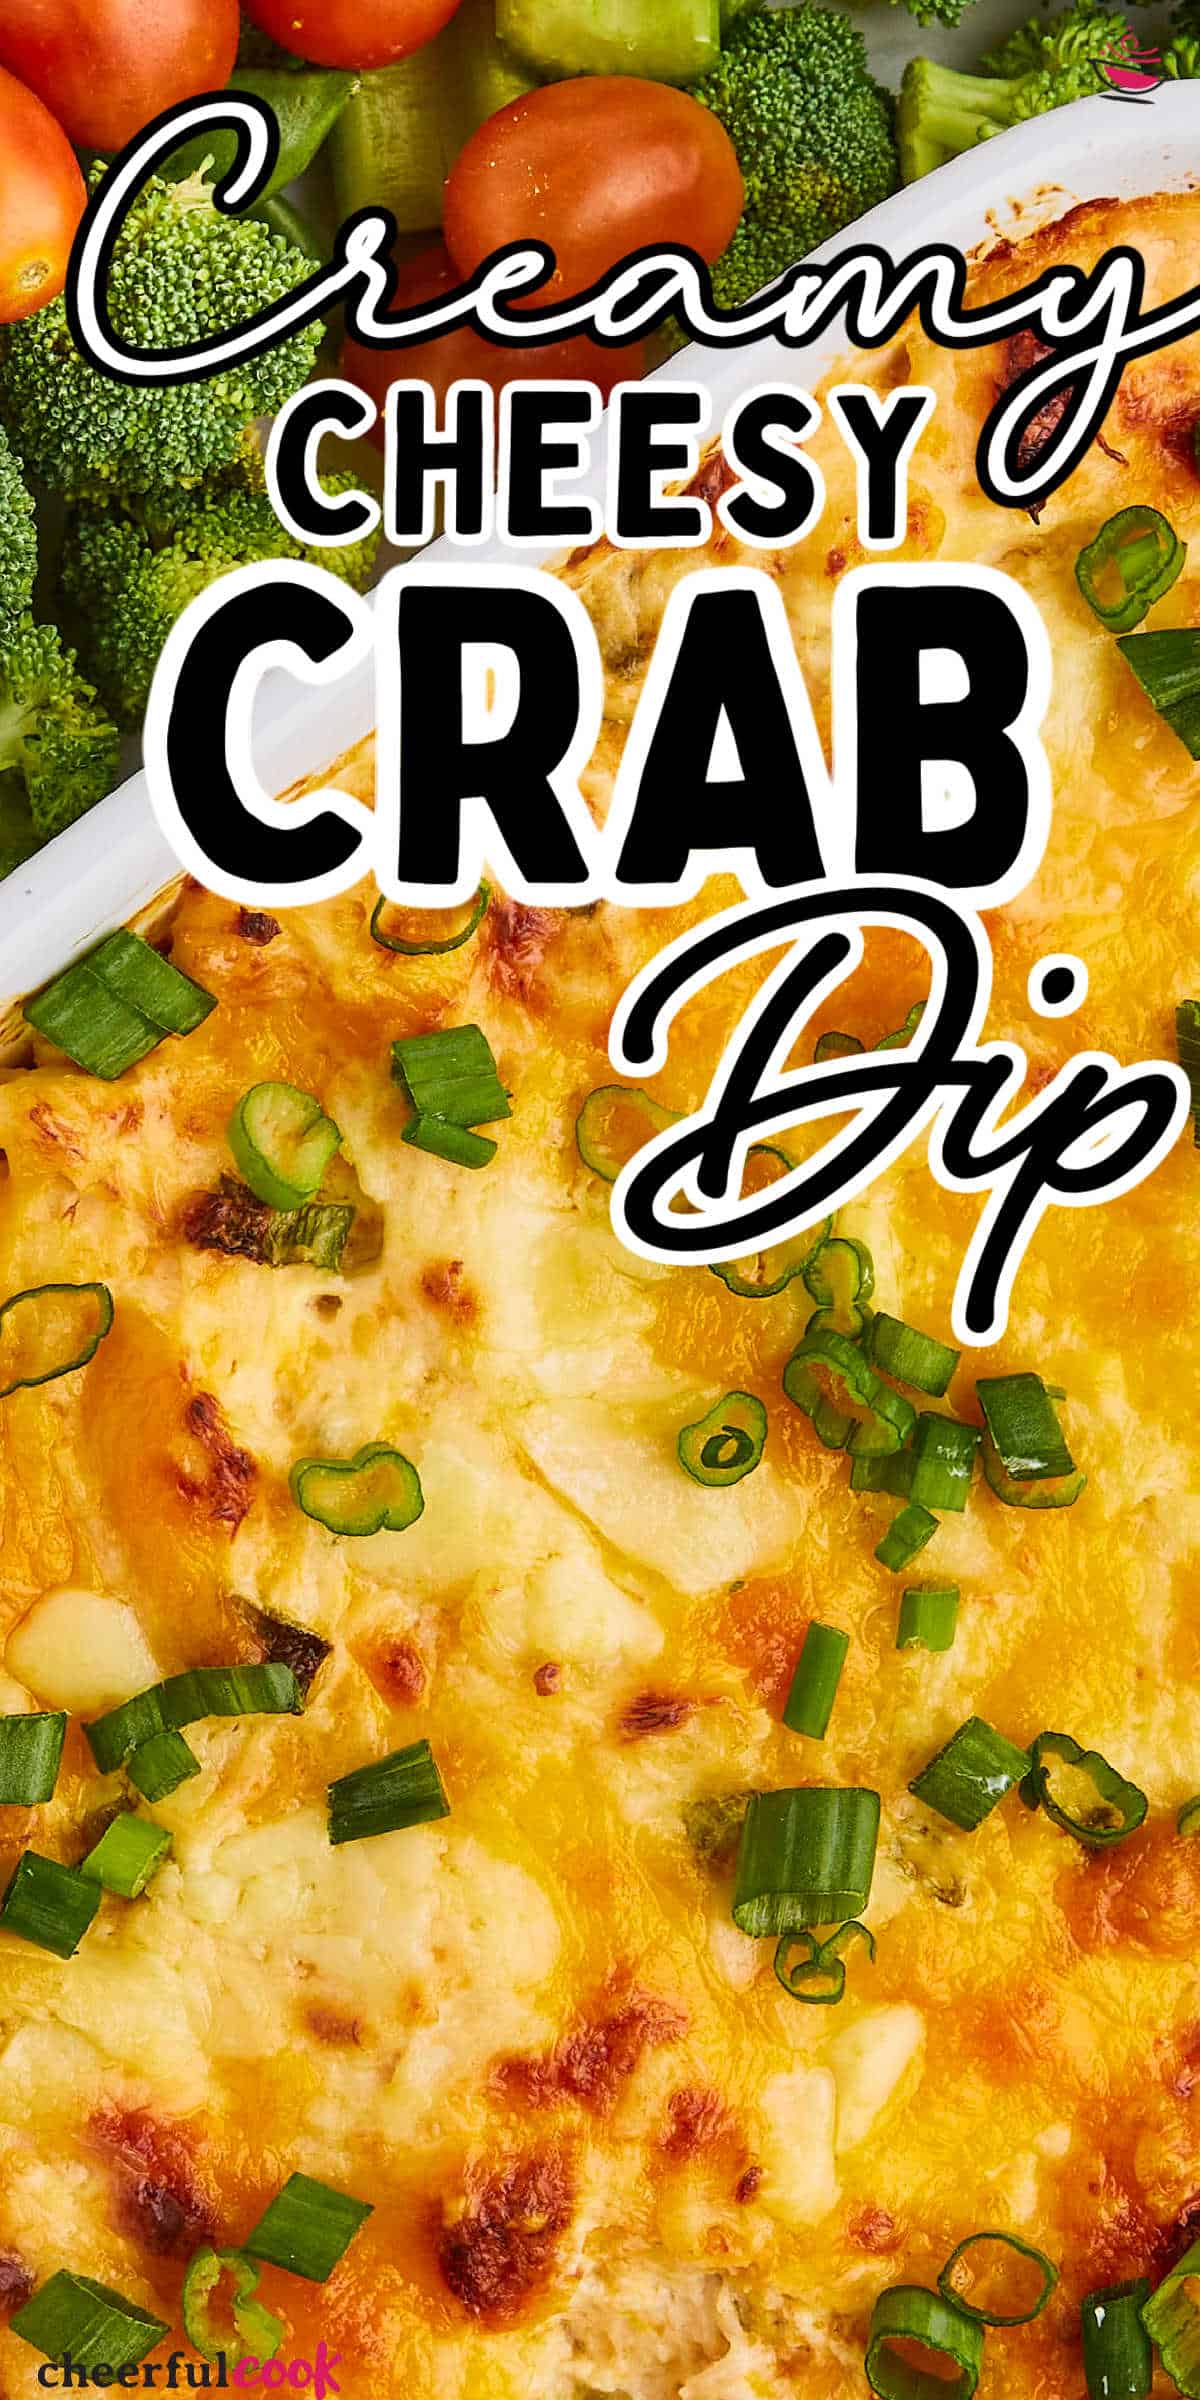 This cheesy, creamy crab dip is a perfect party appetizer. It's made with cream cheese, sour cream, cheddar, parmesan cheese, and green onions for an extra kick of flavor!  #cheerfulcook #crabdip #cheesydip #seafooddip #lumpcrab #appetizer via @cheerfulcook